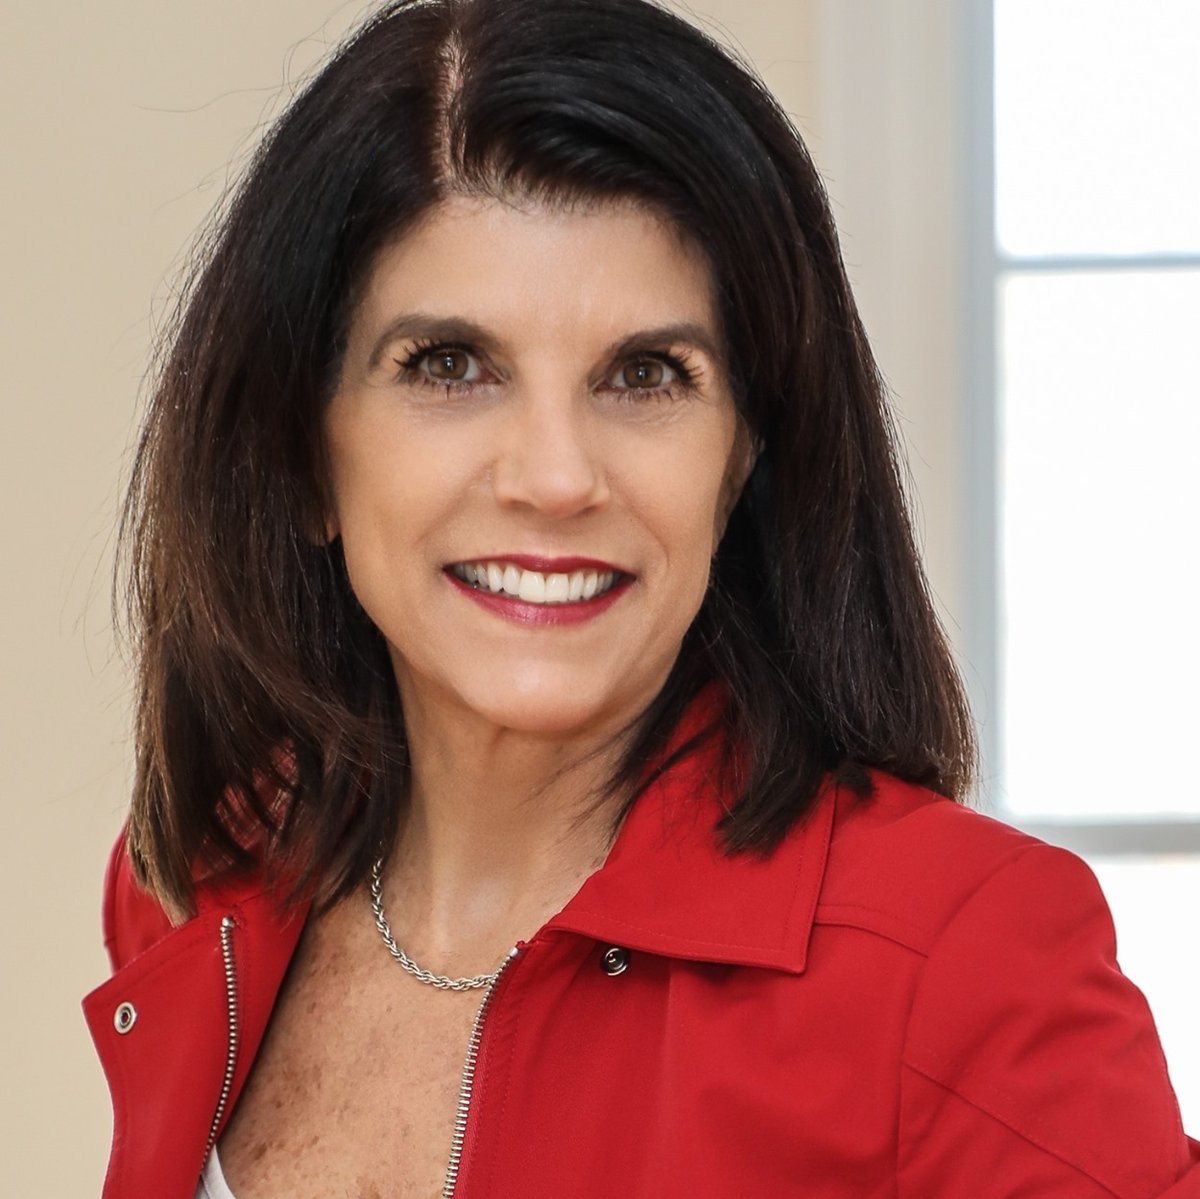 JOIN.BetterLivingRE.com - Another experienced real estate professional, Diane Sullivan, joins Better Living Real Estate®.  Our collaborative culture combined with our industry leading #Support & software helps you increase your closings & win more clients. #BetterLivingRE